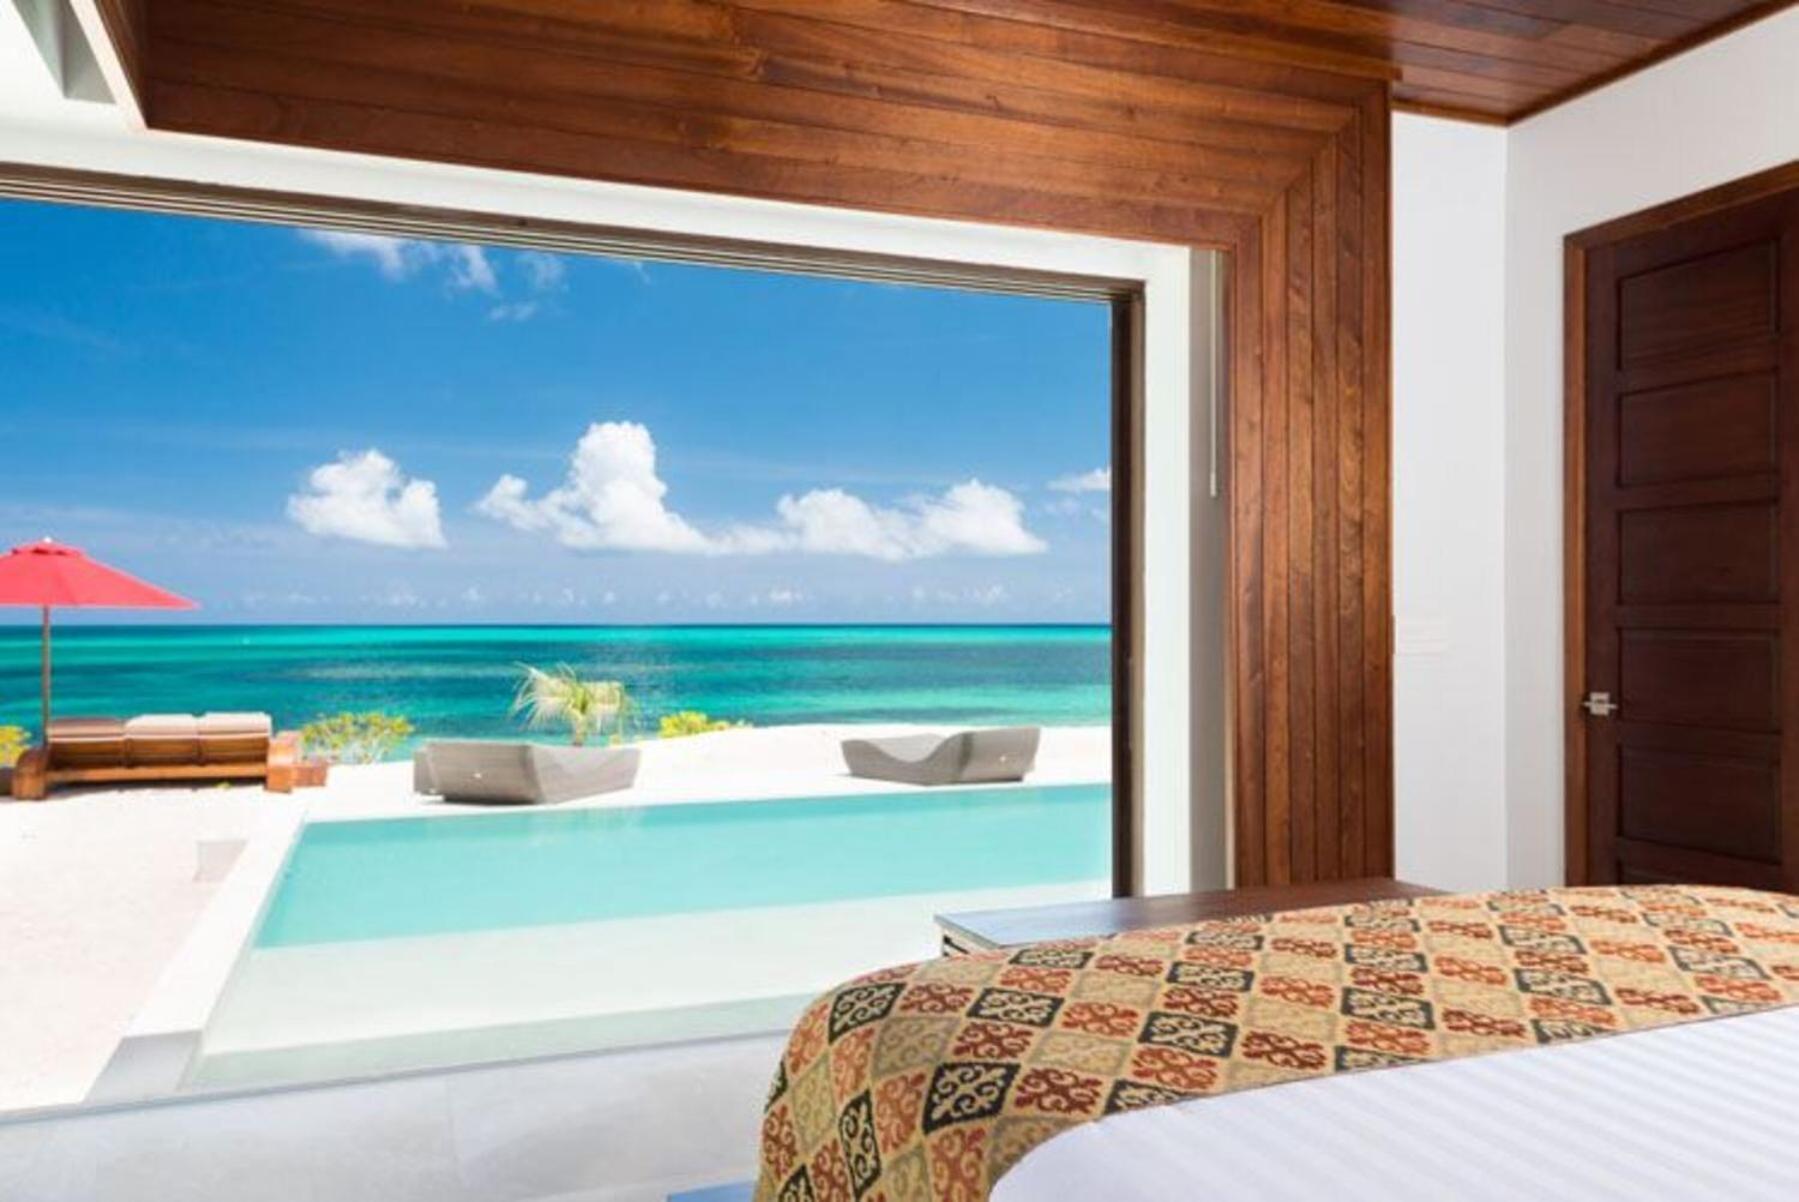 Villa Kandi With 2 Bedrooms In Provindenciales Turks And Caicos The Bight Settlements 外观 照片